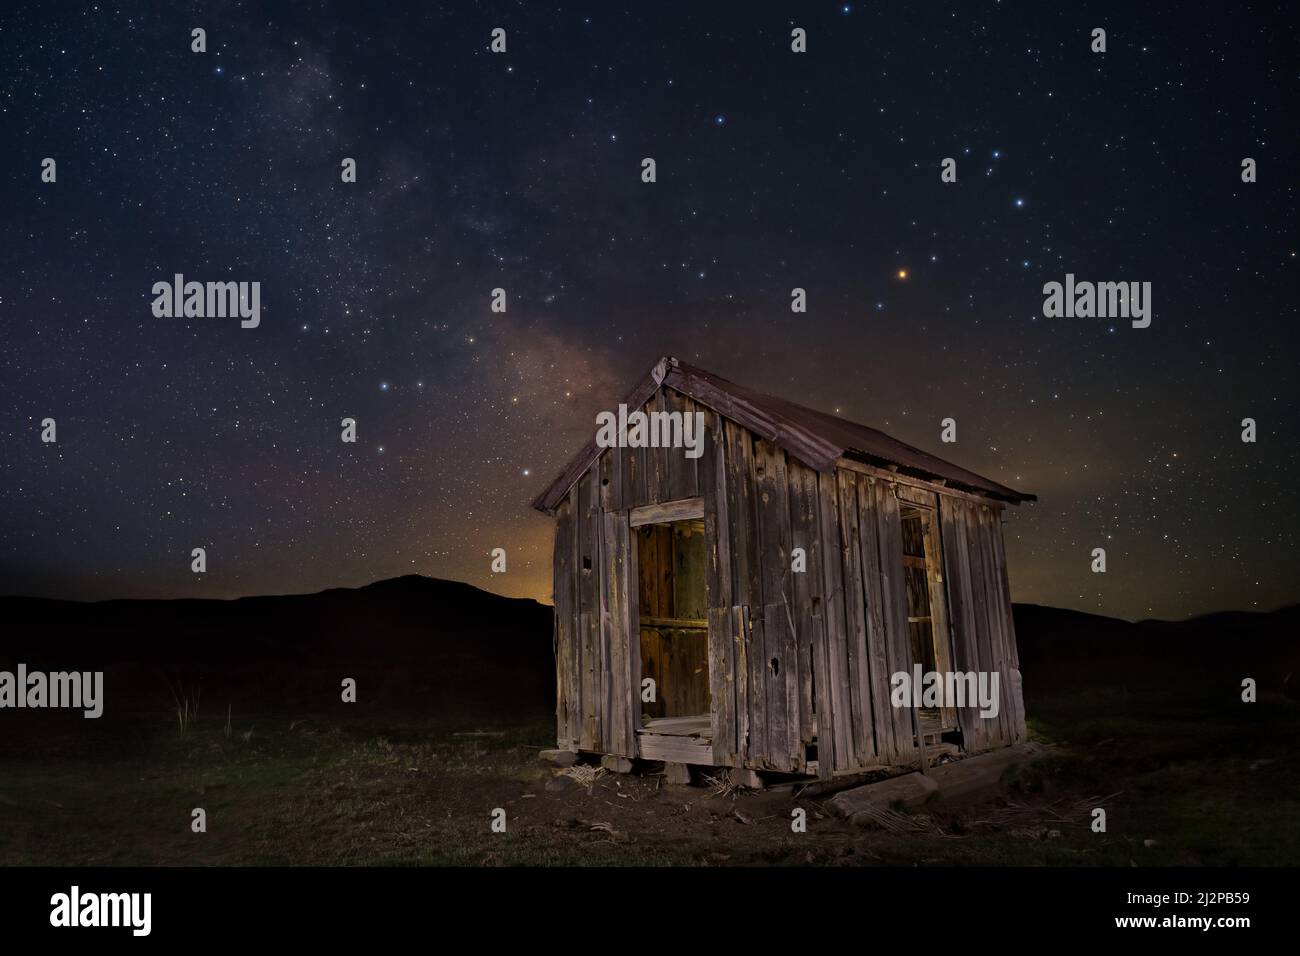 Abandoned shack un the high desert of Lassen County California USA.  Photographed under the galactic core of the Milky Way during morning twilight. Stock Photo